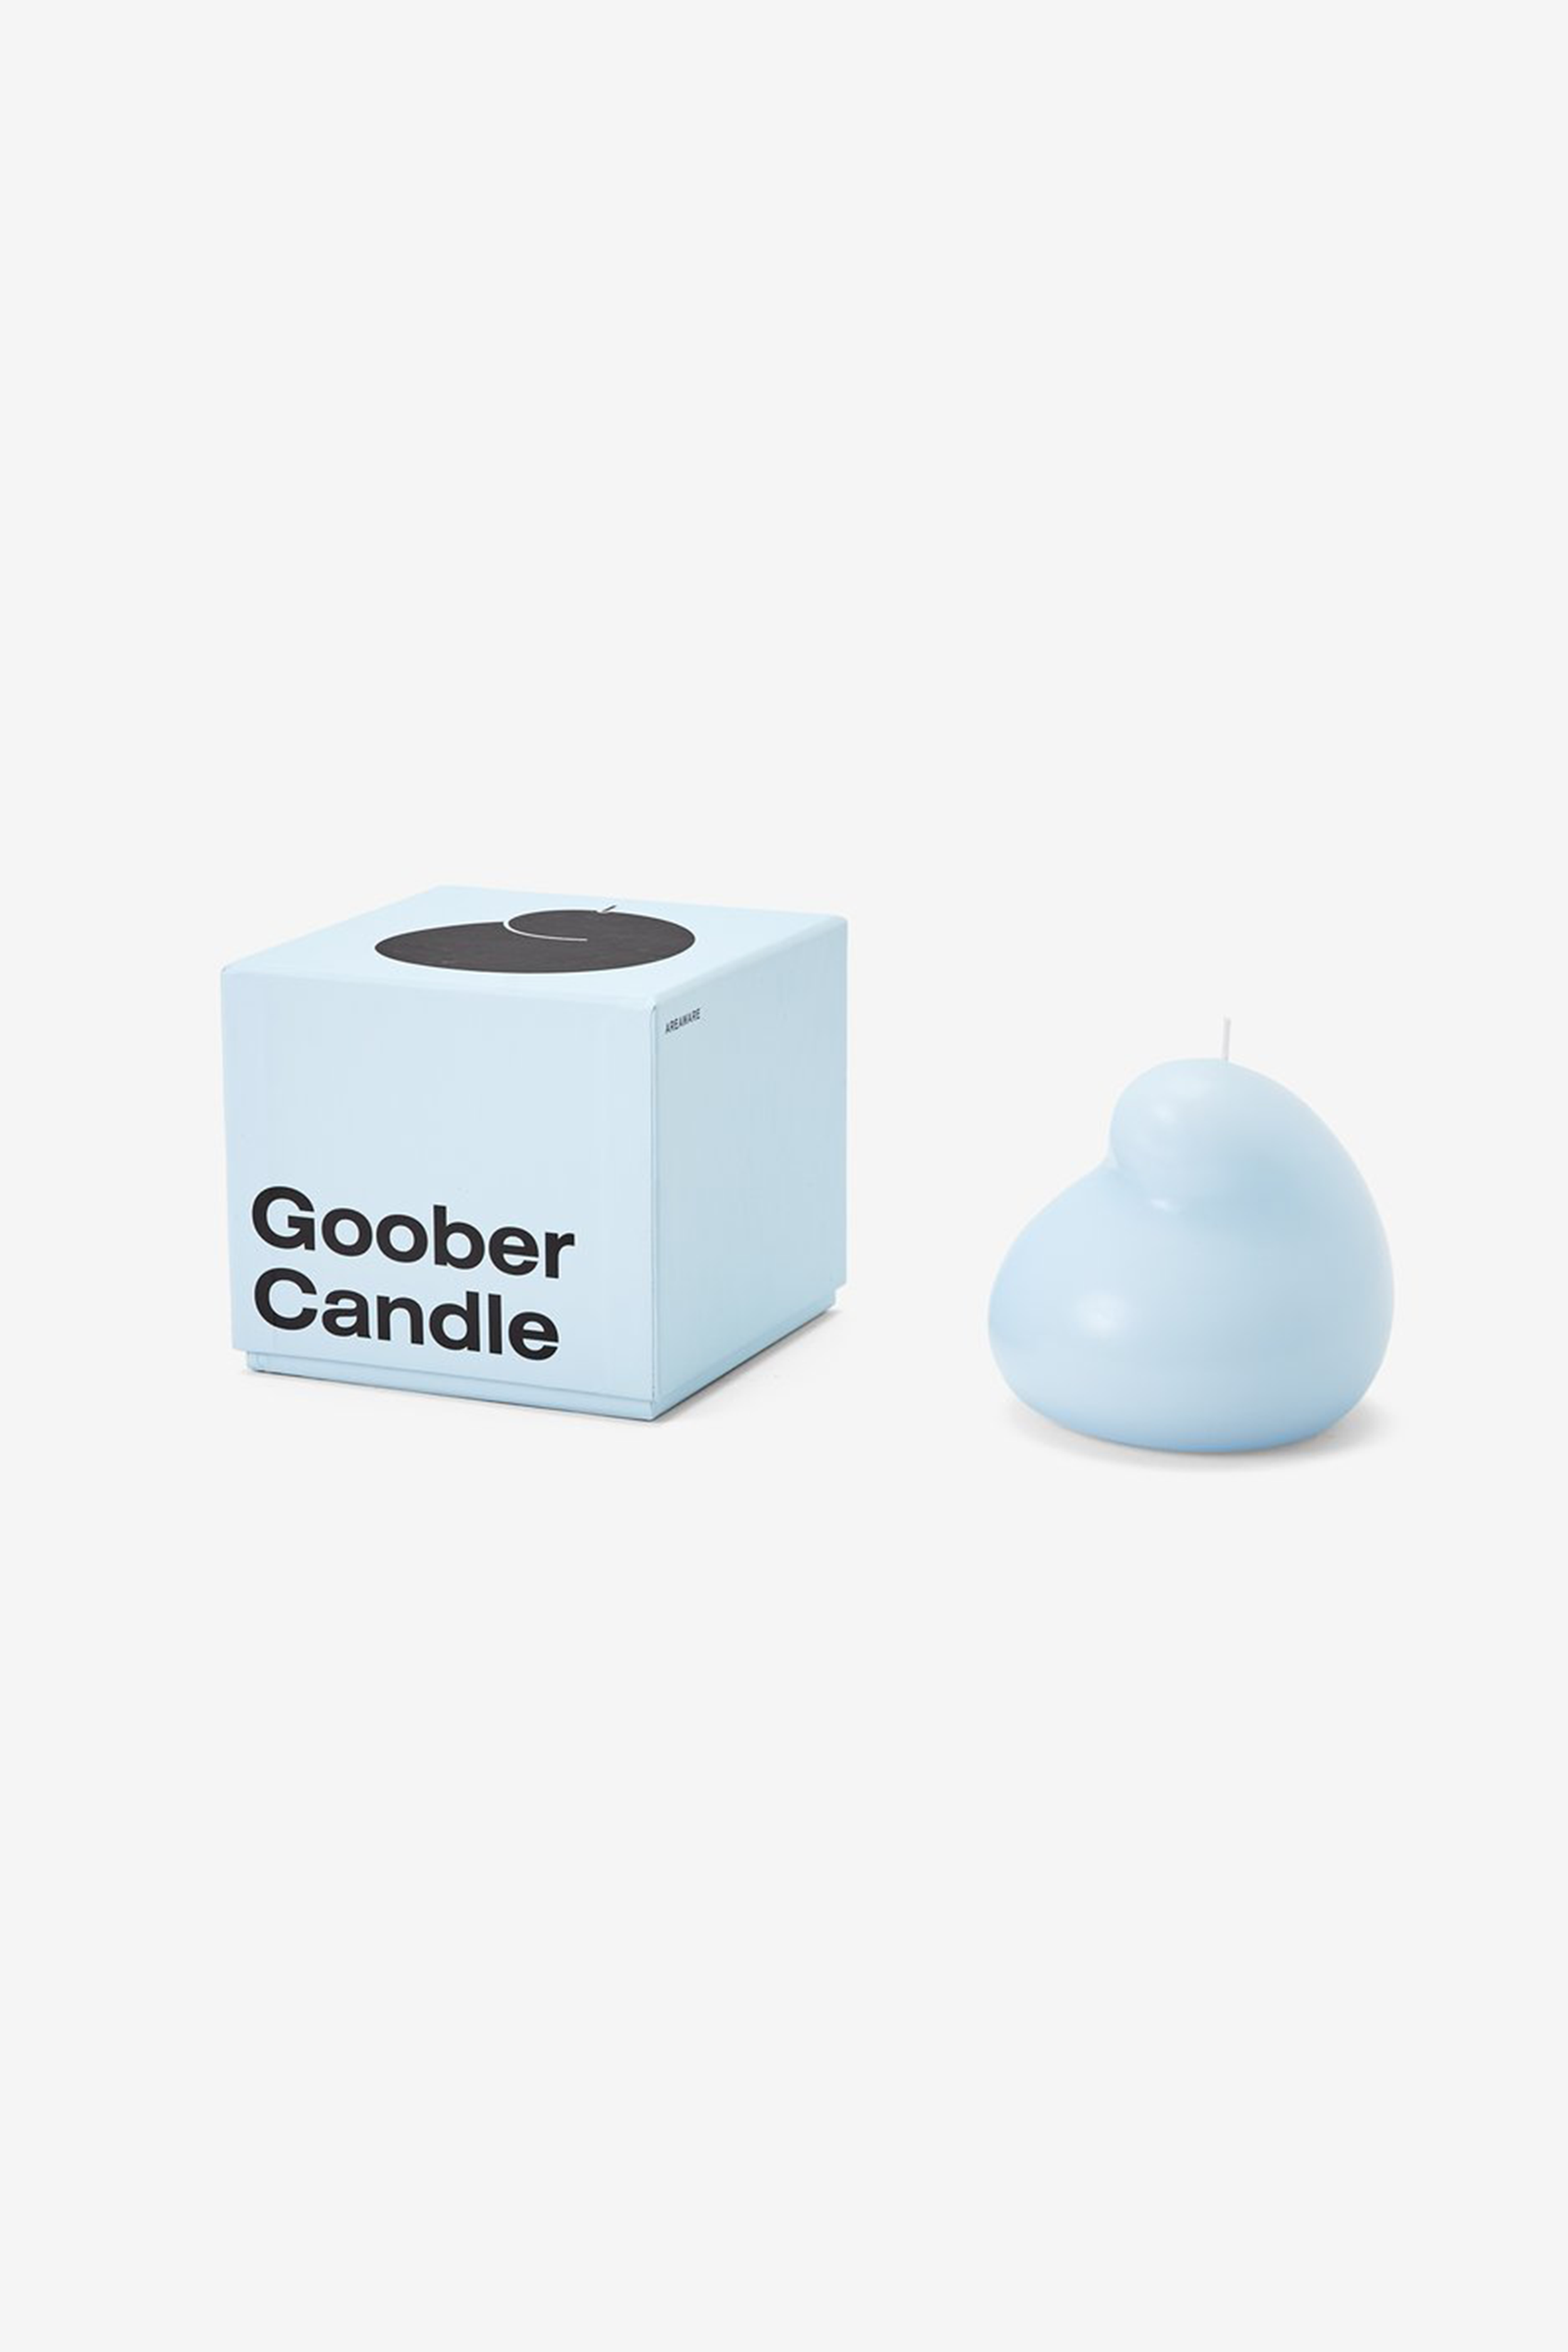 Goober Candle in Eh (Blue)